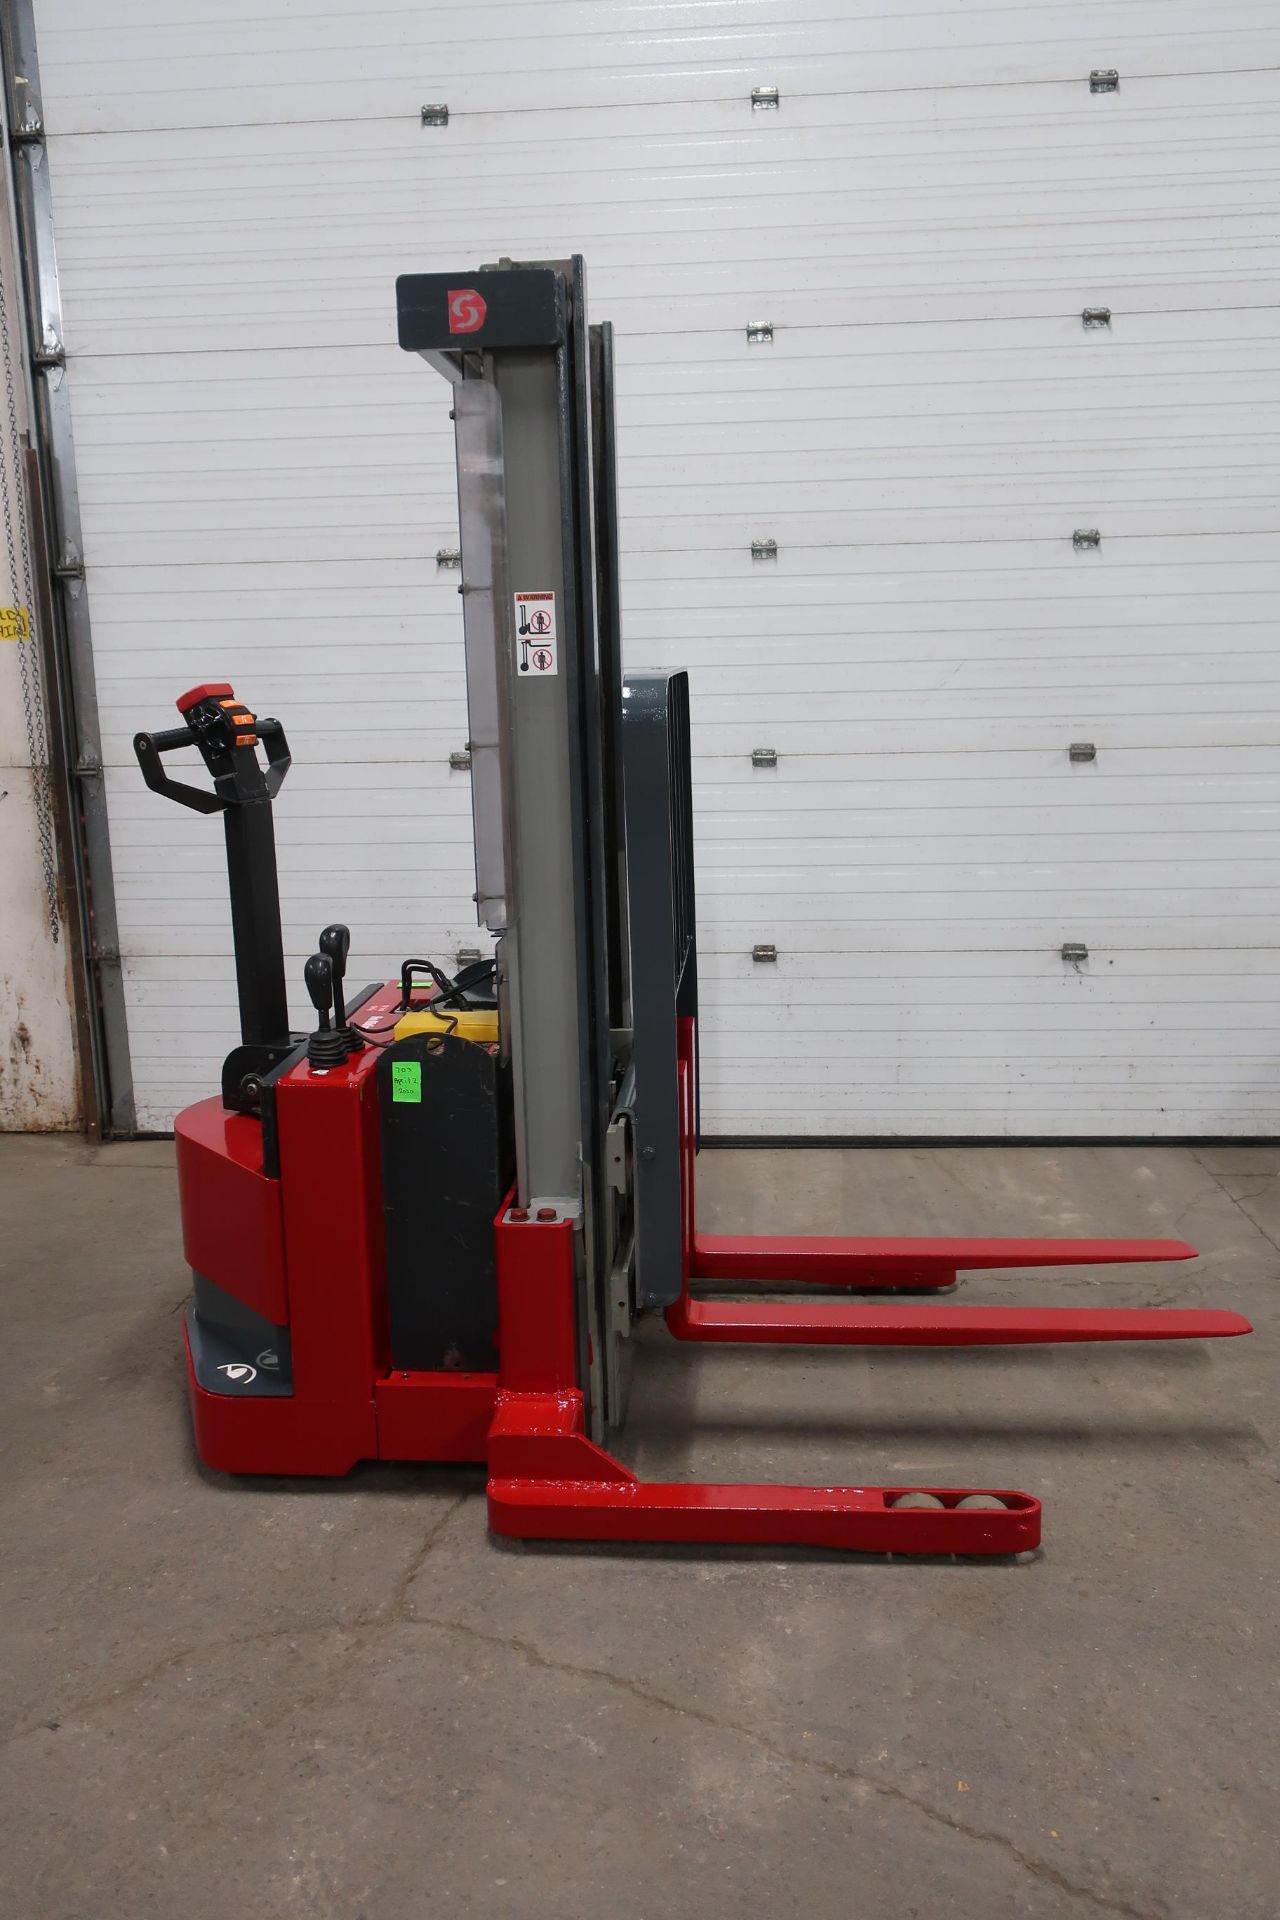 Dockstocker Stacker Order Picker Pallet Lifter unit 2750lbs capacity ELECTRIC with 2-stage mast